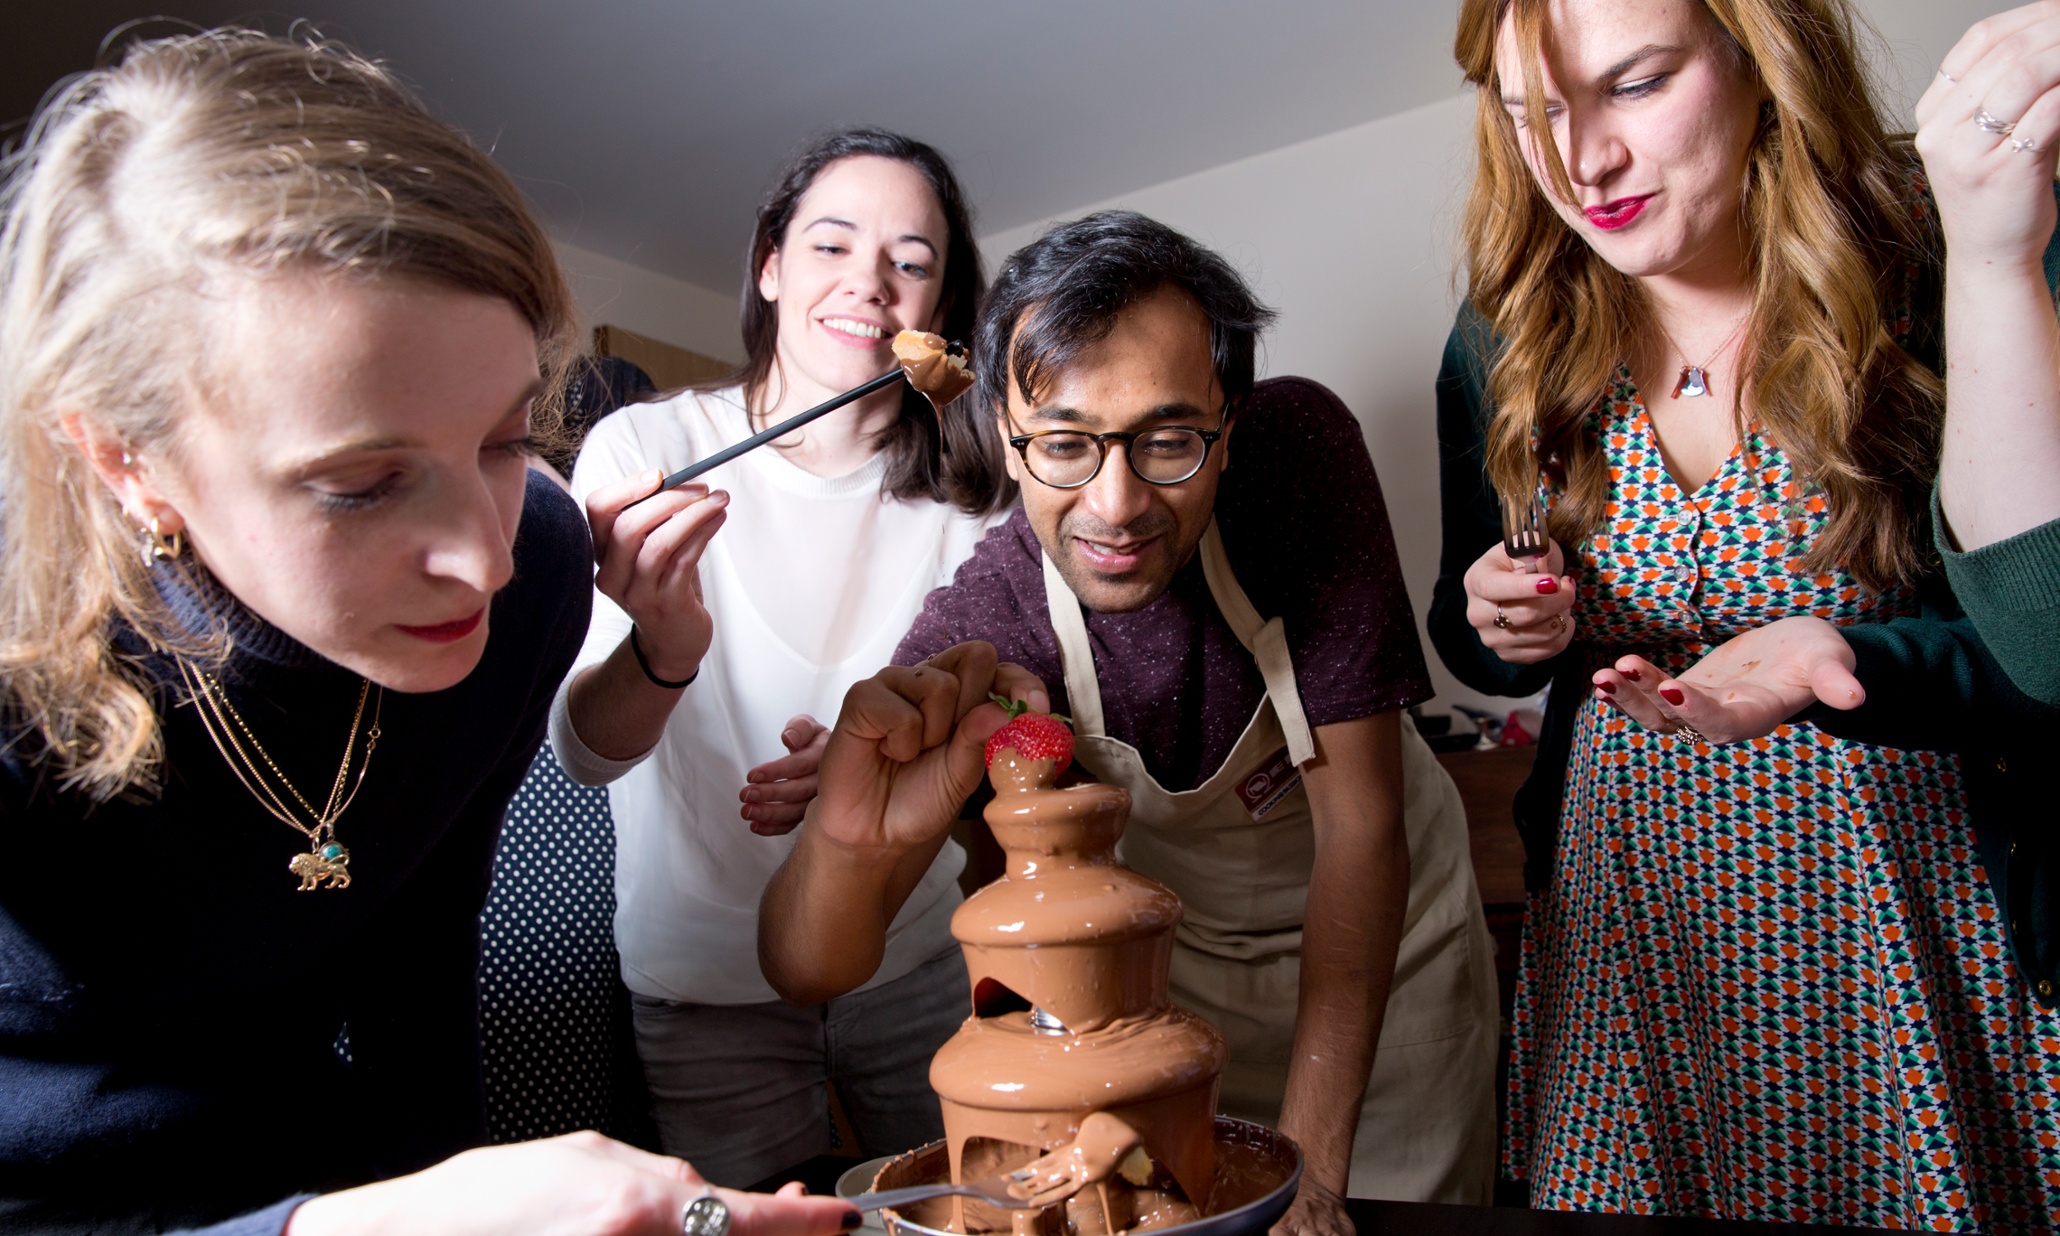 Rhik and friends tuck into the chocolate fountain